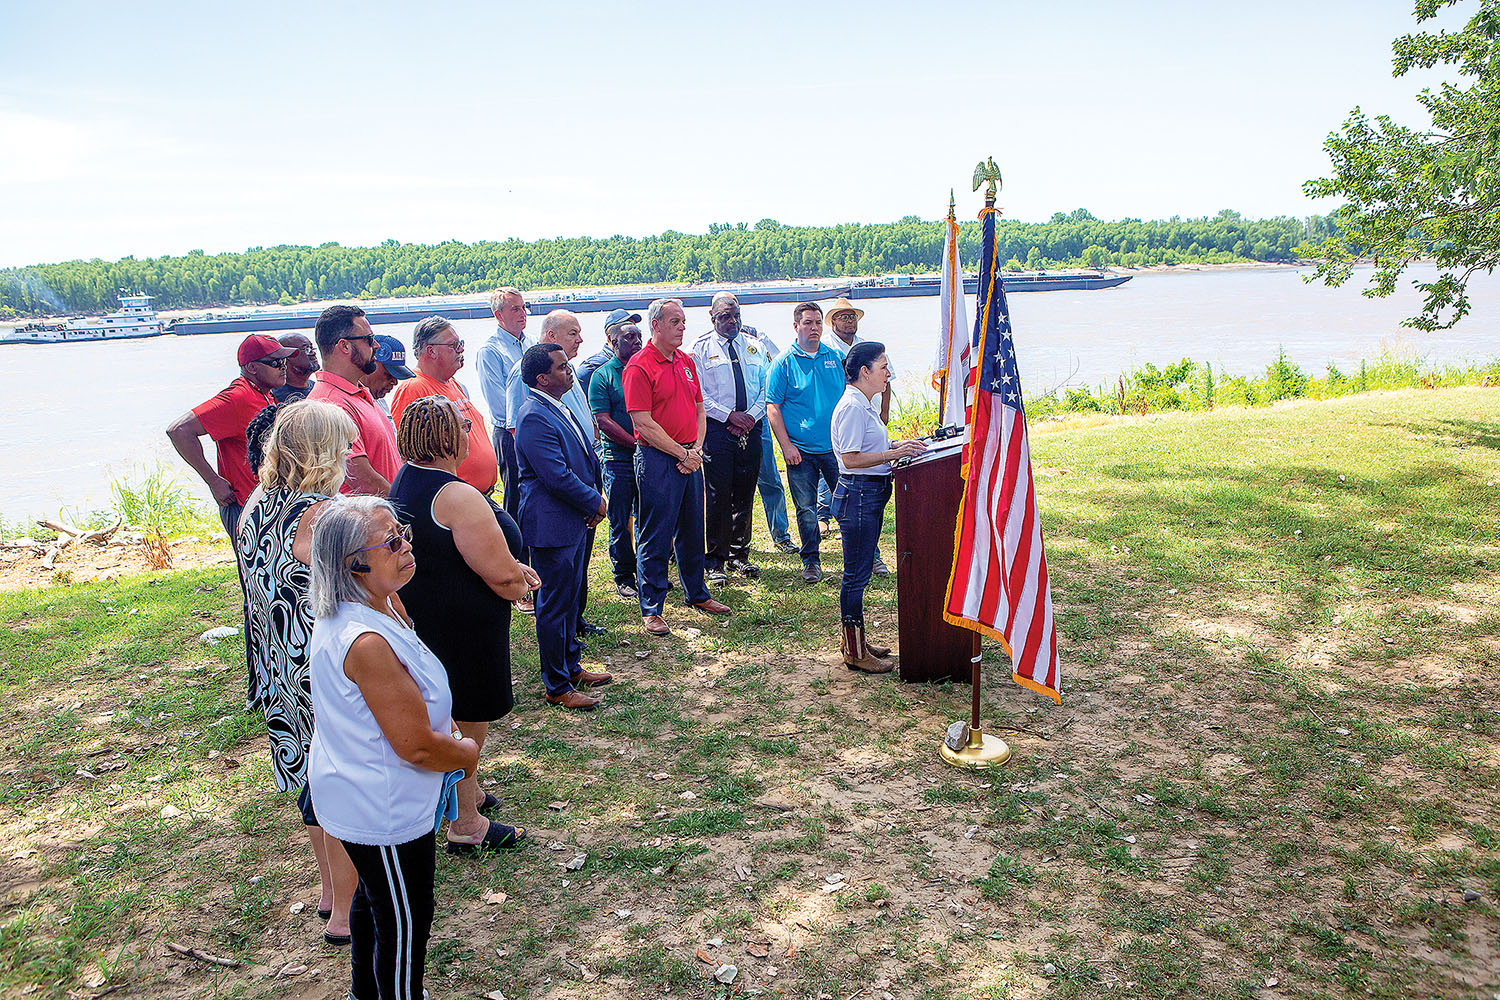 Illinois Comptroller Susana A. Mendoza speaks about the planned port in Cairo, Ill., at a news conference June 24 at Fort Defiance State Park, at the confluence of the Mississippi and Ohio rivers. (Photo courtesy of Illinois Comptroller’s Office)